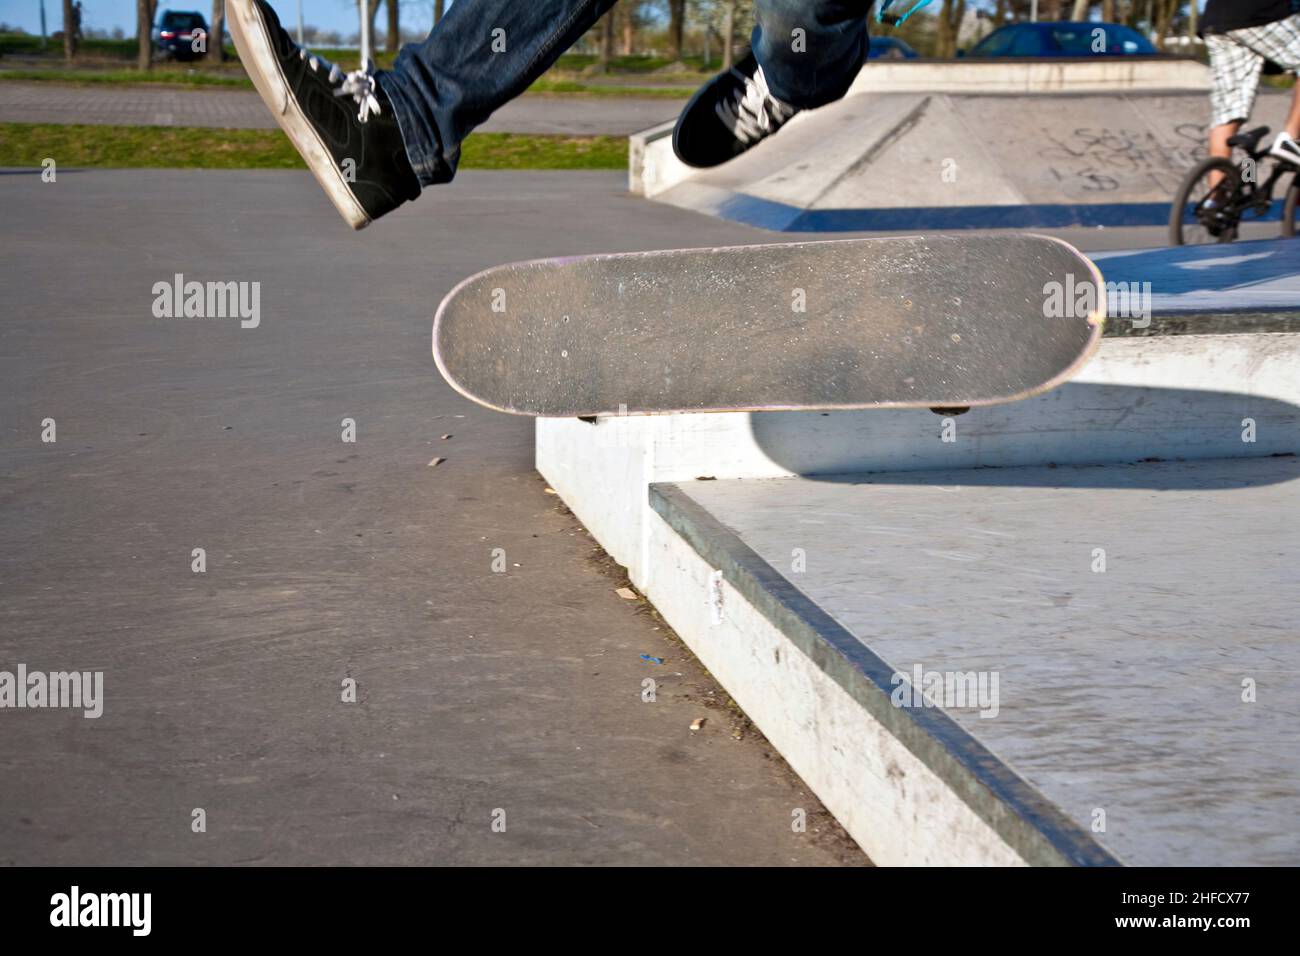 boy with scateboard is going airborne at a skate park Stock Photo